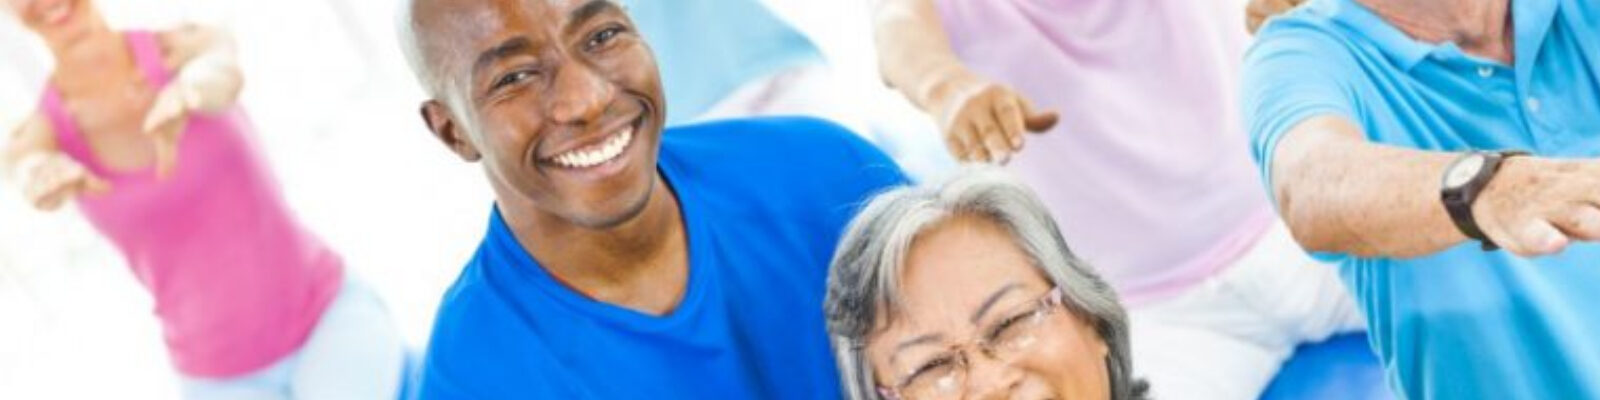 programs for seniors at the Y